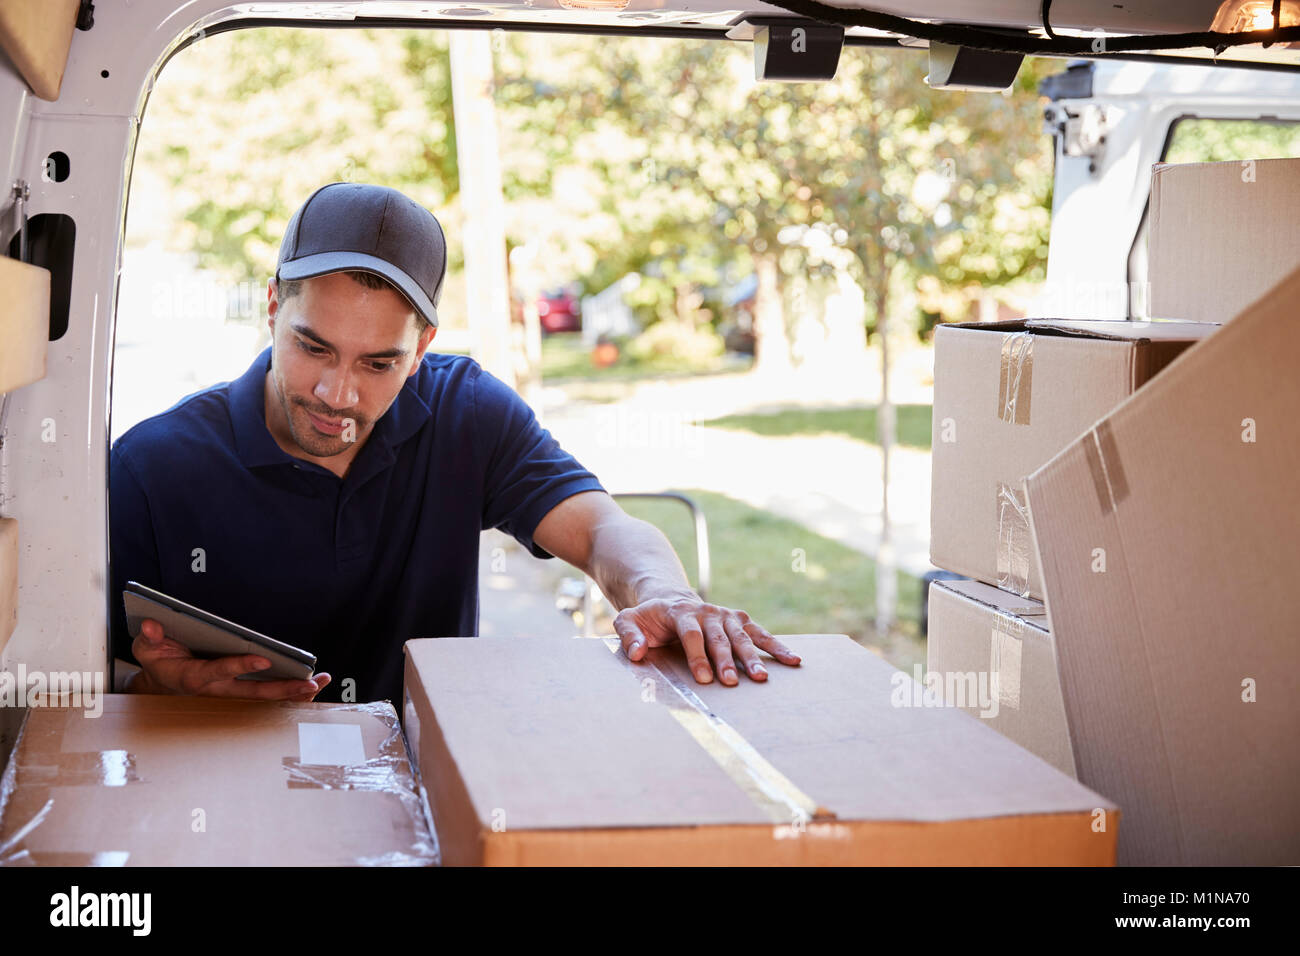 Courier With Digital Tablet Checking Packages In Van Stock Photo